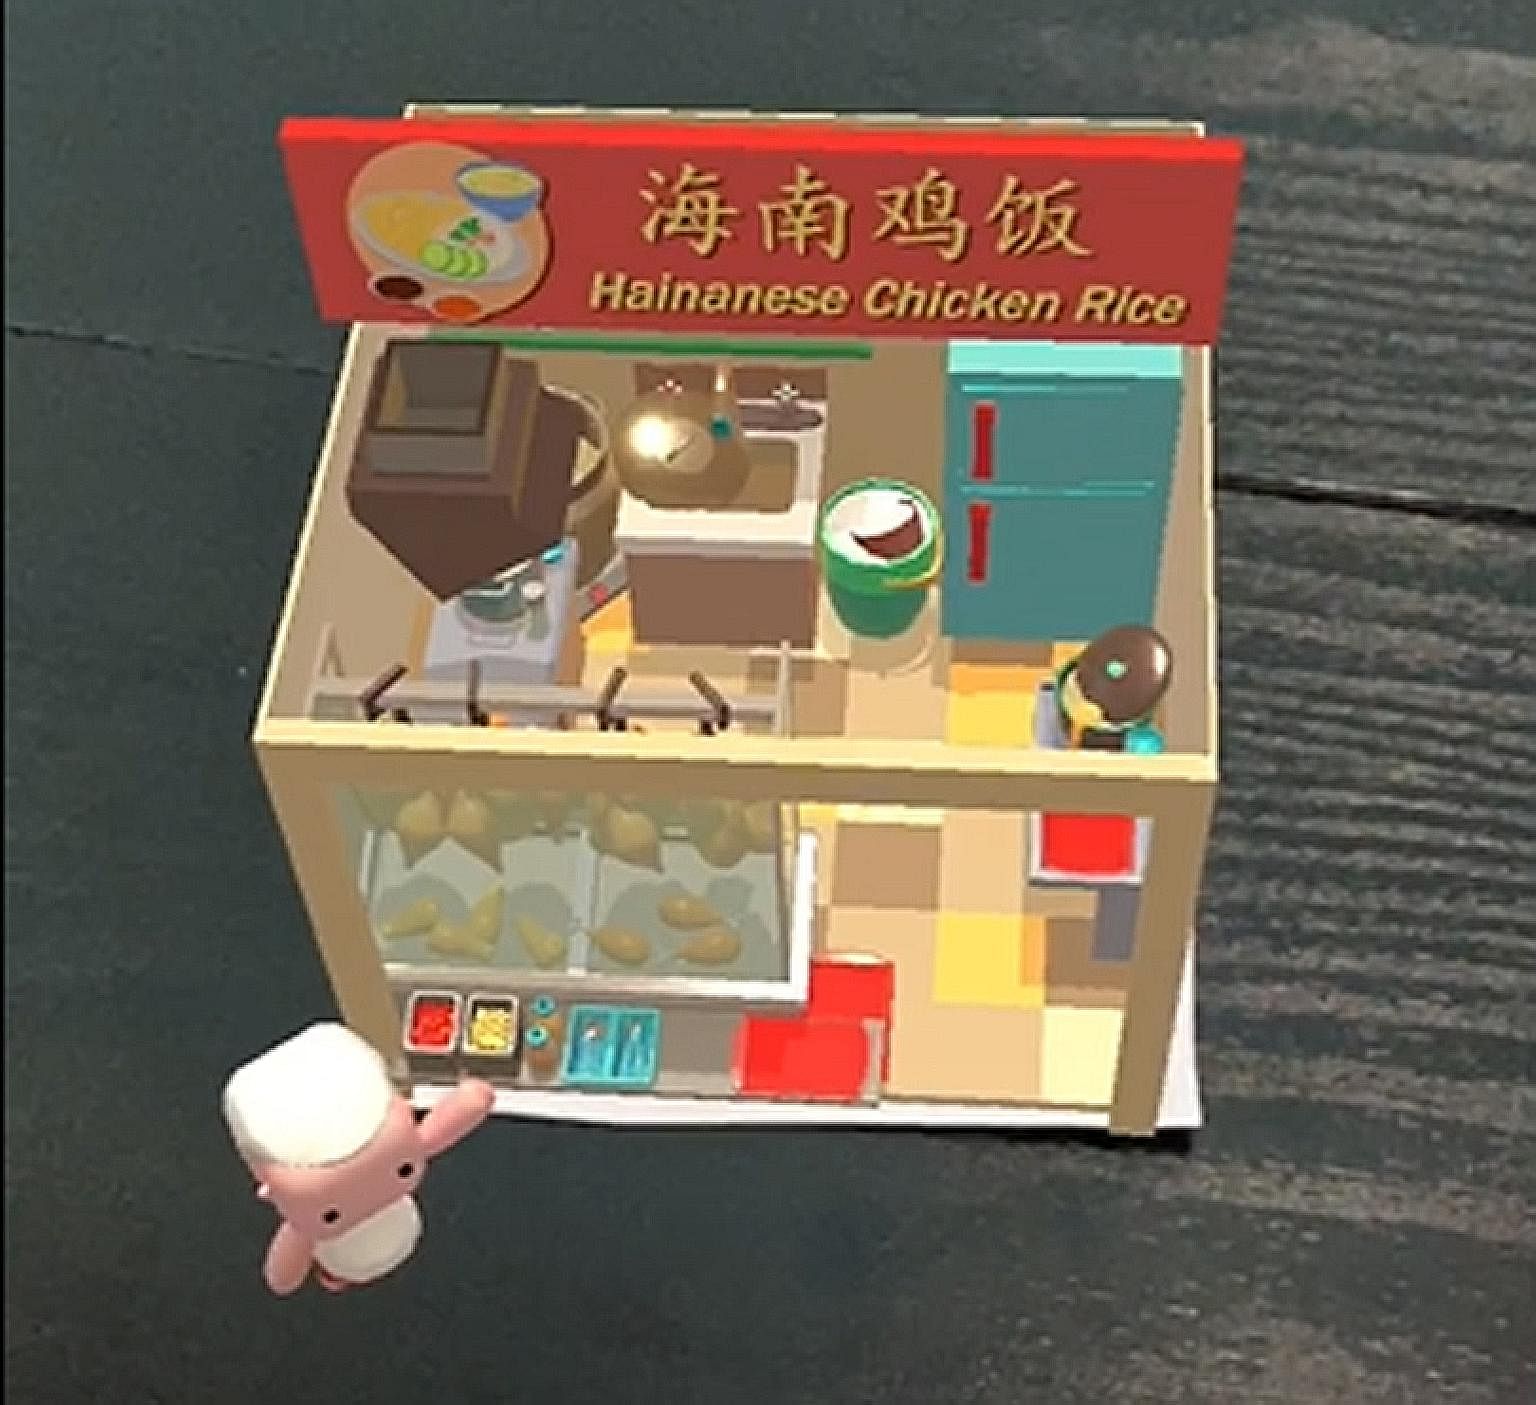 A screenshot of an augmented reality prototype animation of a hawker stall developed by the Singapore Tourism Board to showcase the possibilities of using the technology in the tourism sector.